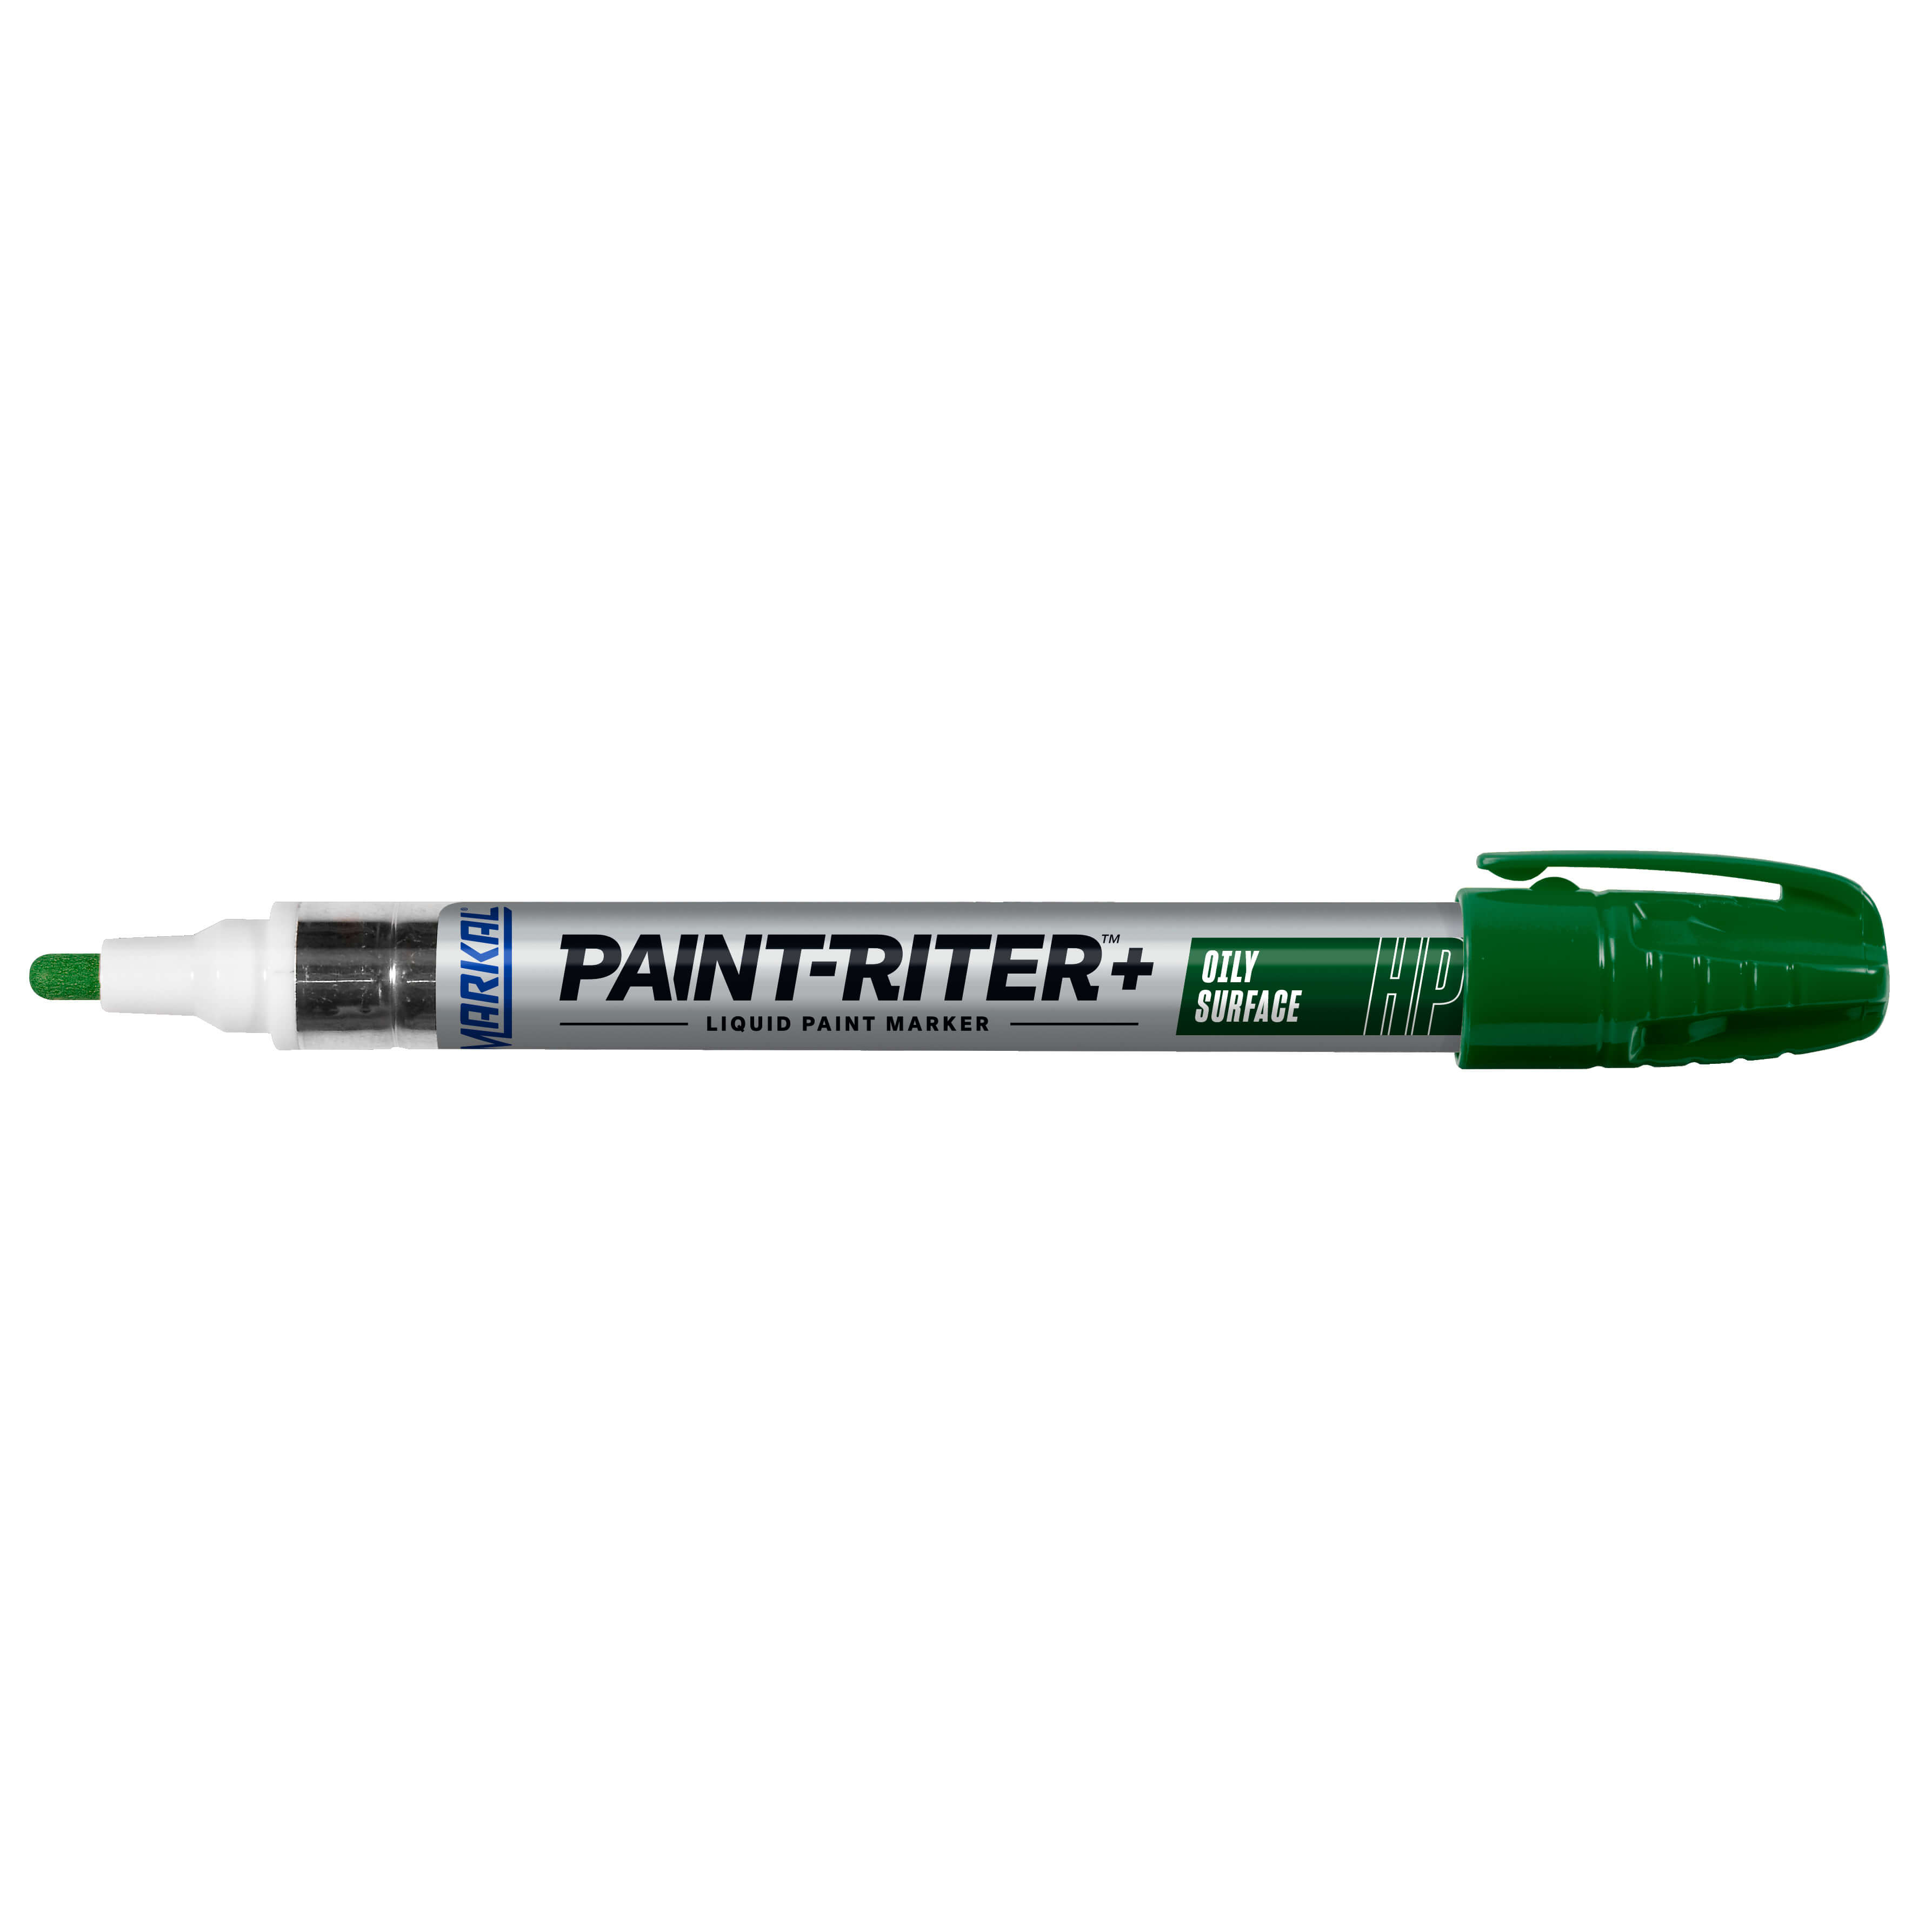 Paint-Riter + Oily Surface HP – paint marker for oily surfaces, dark green